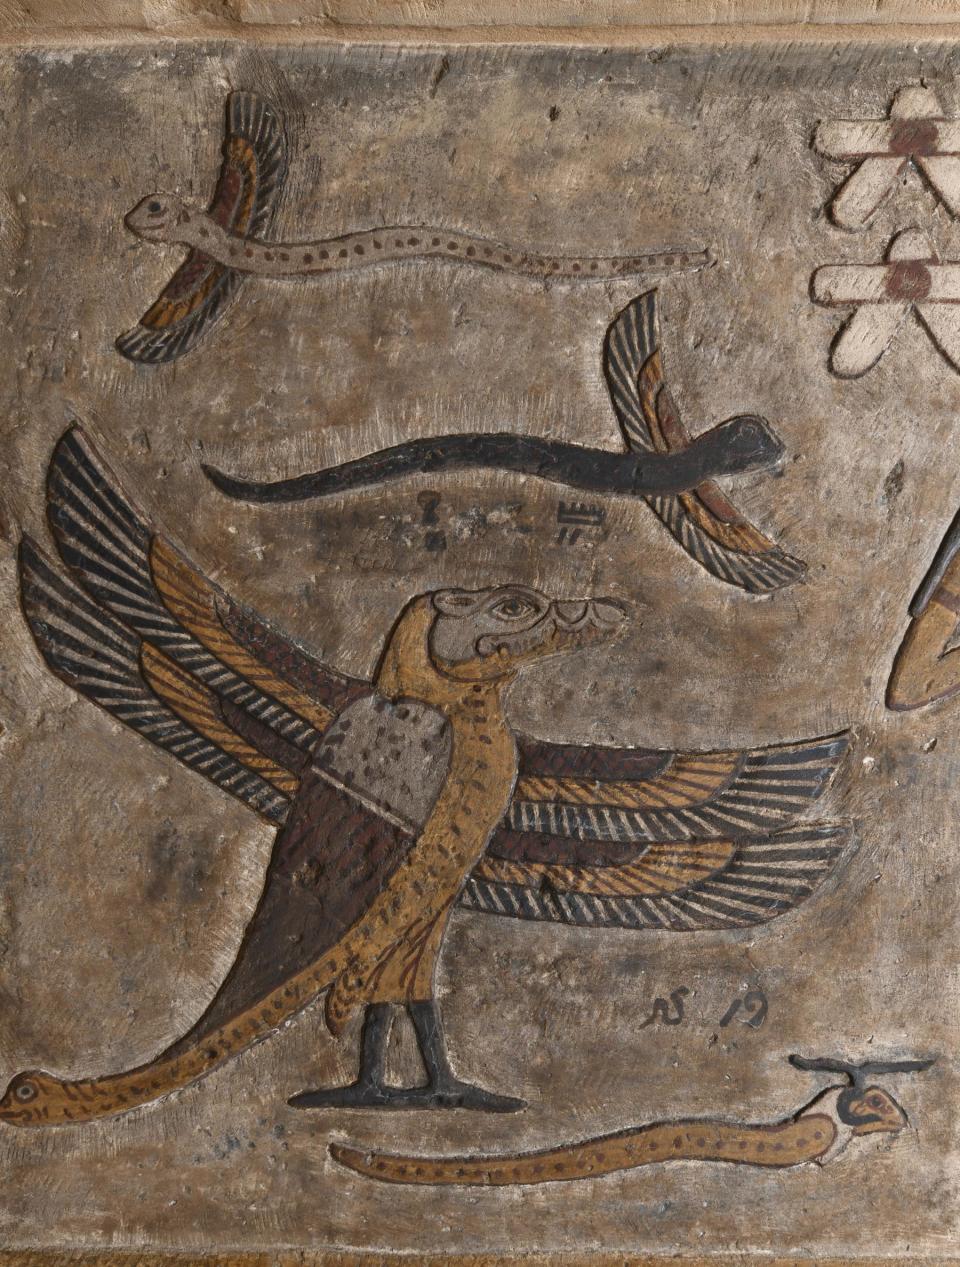 A painting shows winged snakes flying through the sky next to a mythical creature with the head of a crocodile and four wings.